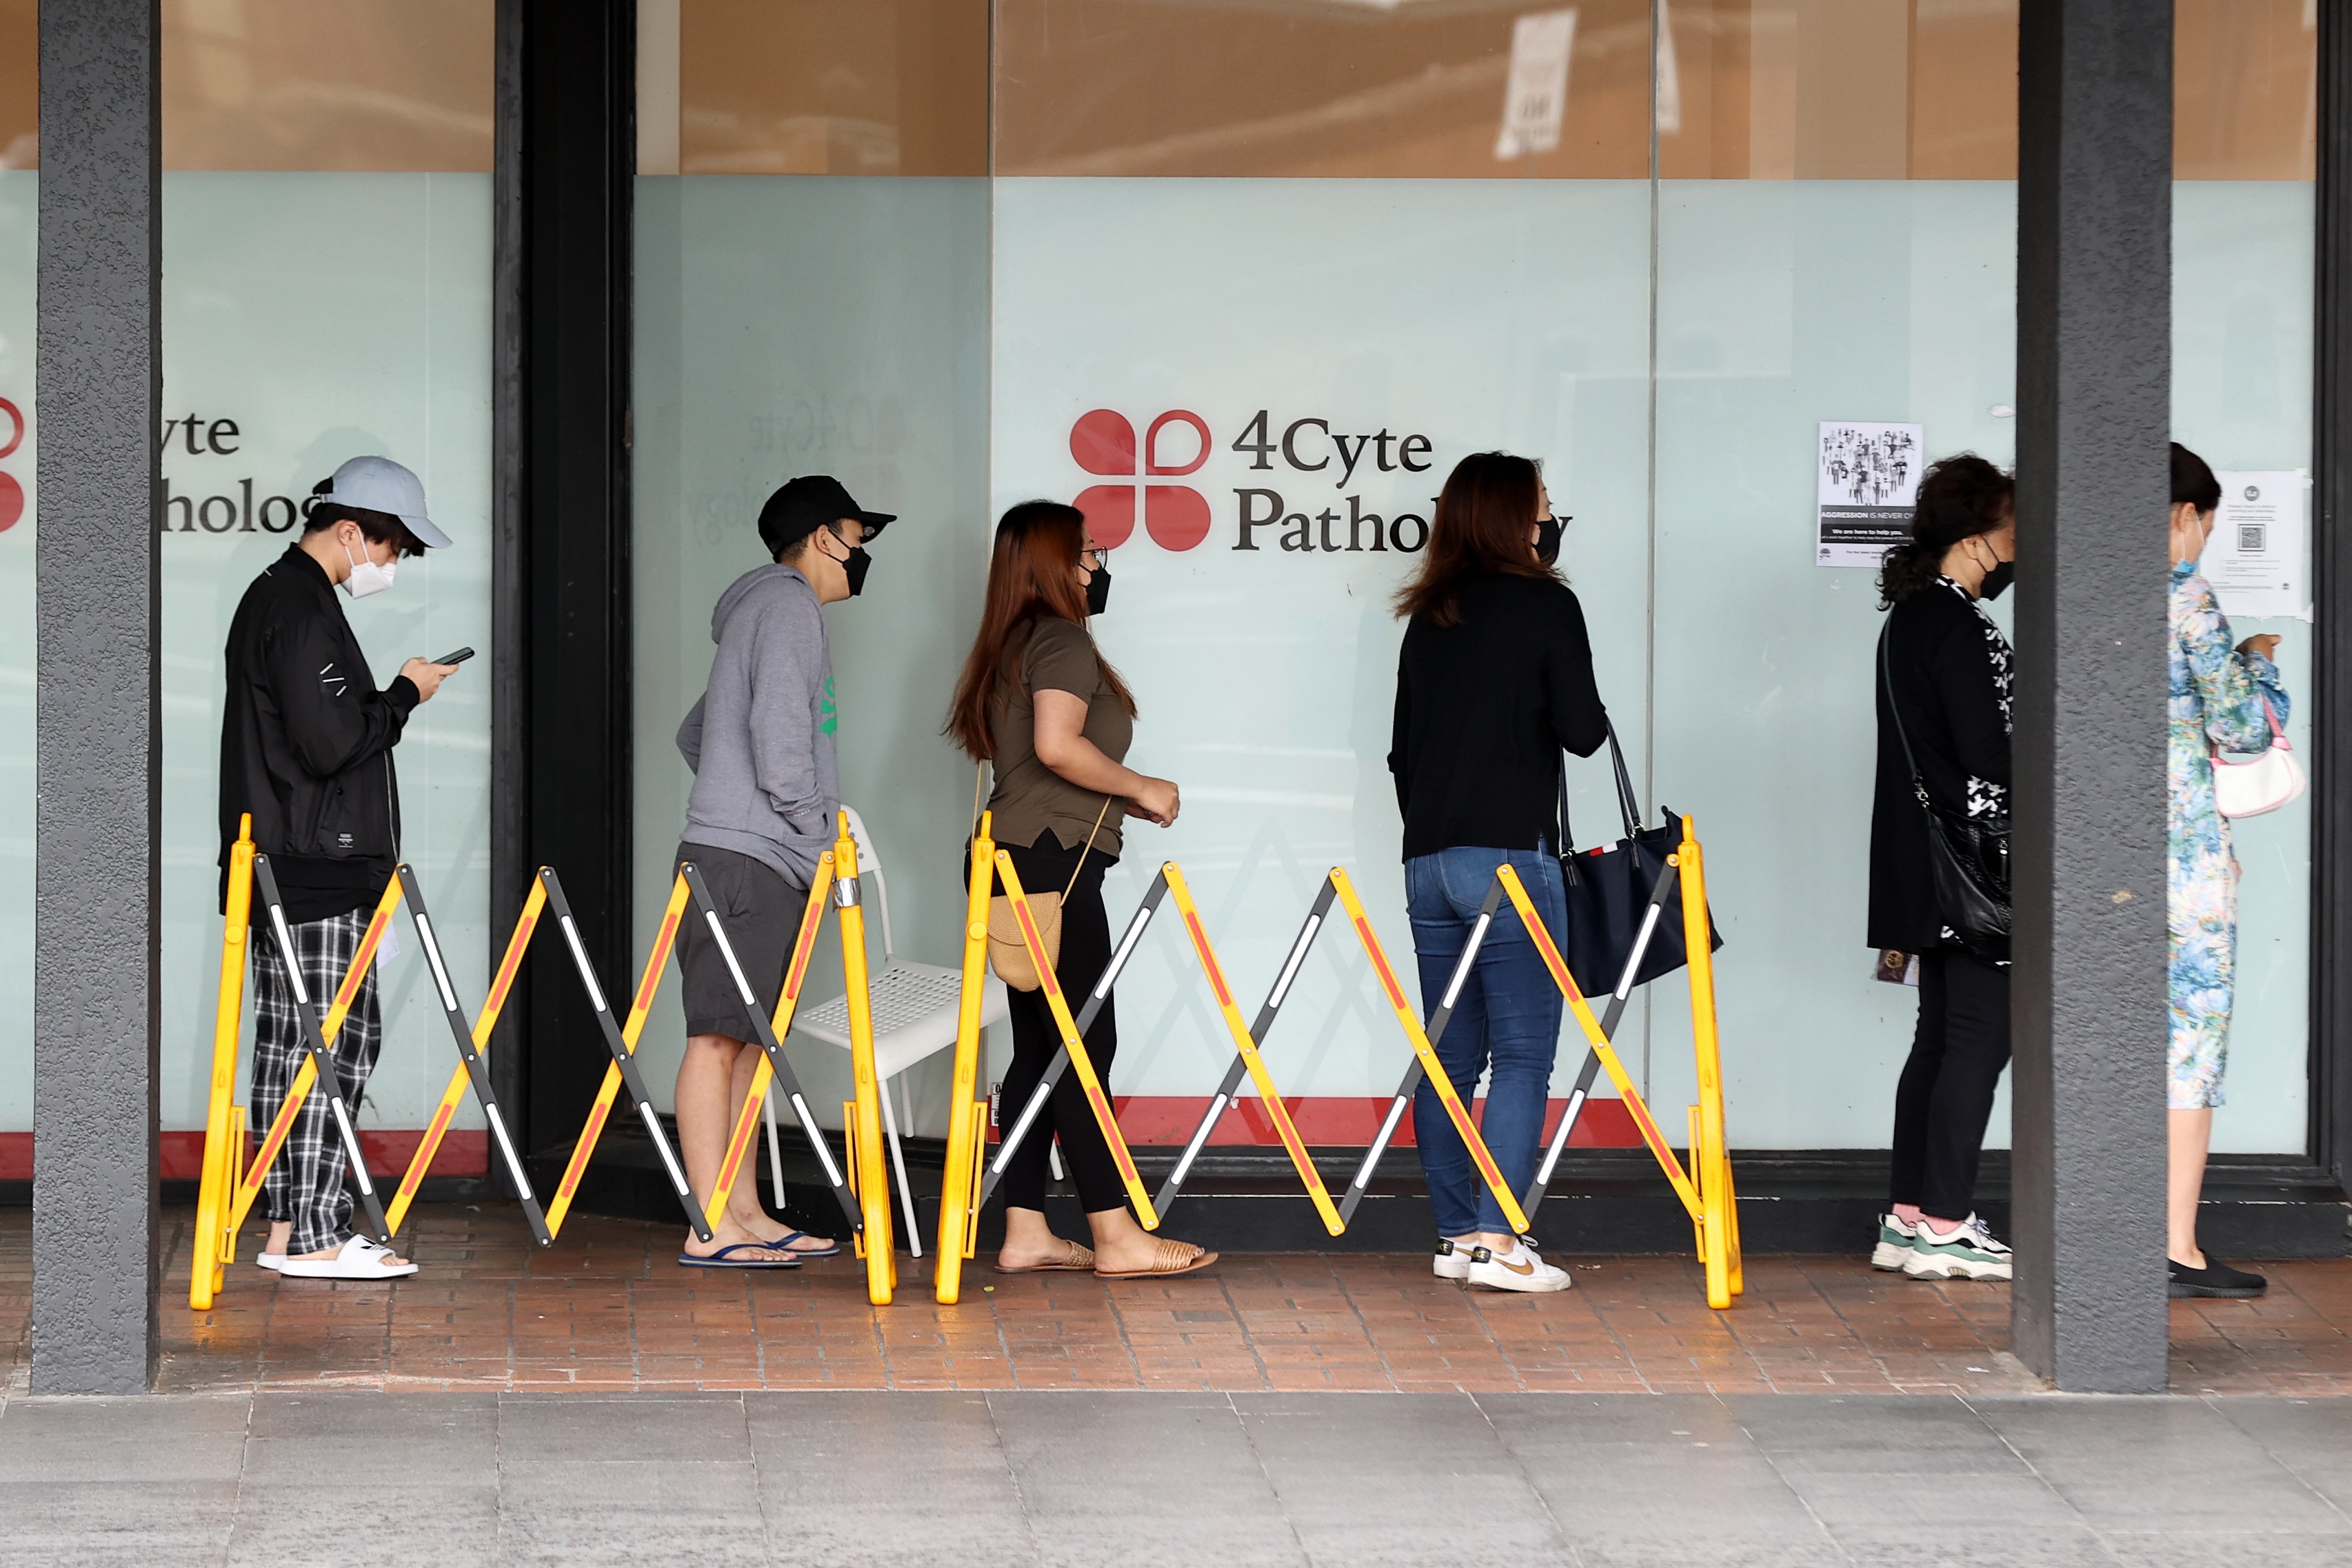 Members of the public queue to take Covid-19 PCR tests in Sydney's CBD